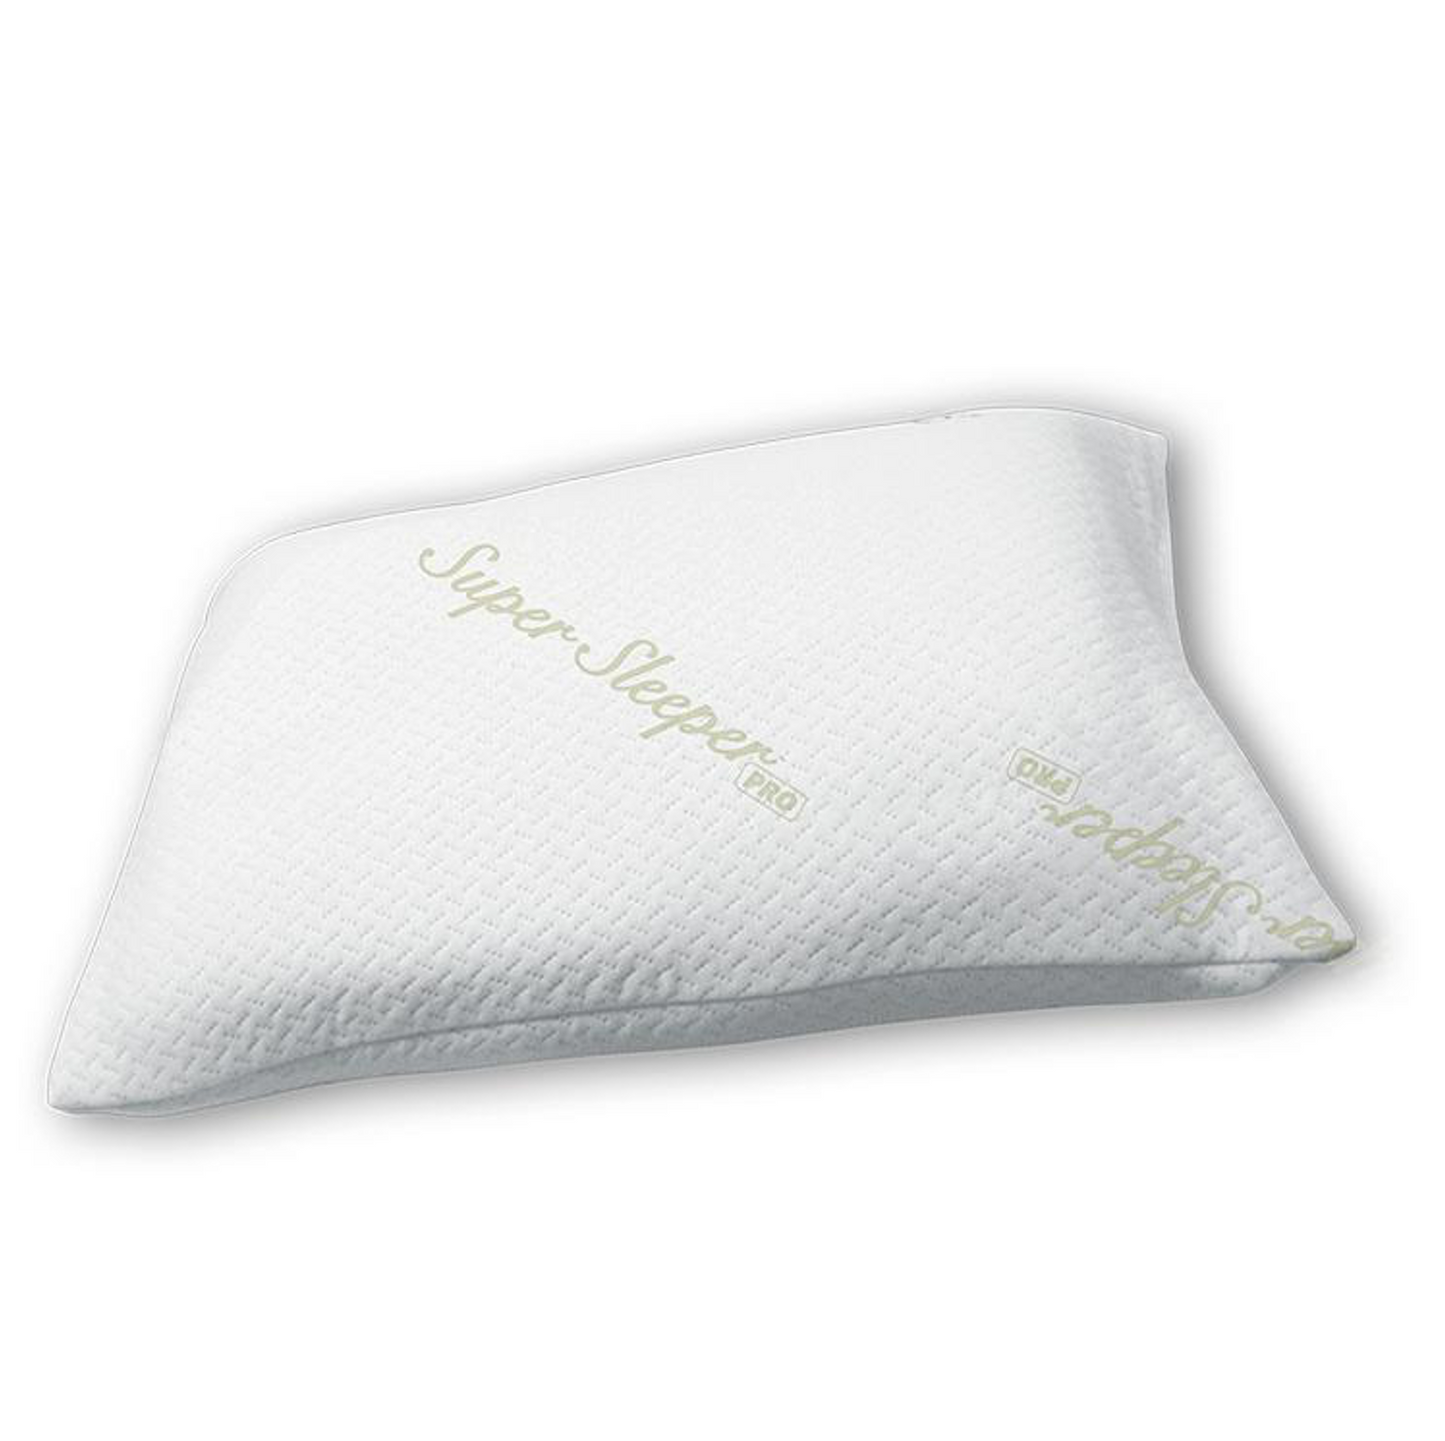 Super Sleeper Pro Memory Foam 8 in 1 Support Pillows With Bamboo Cover!